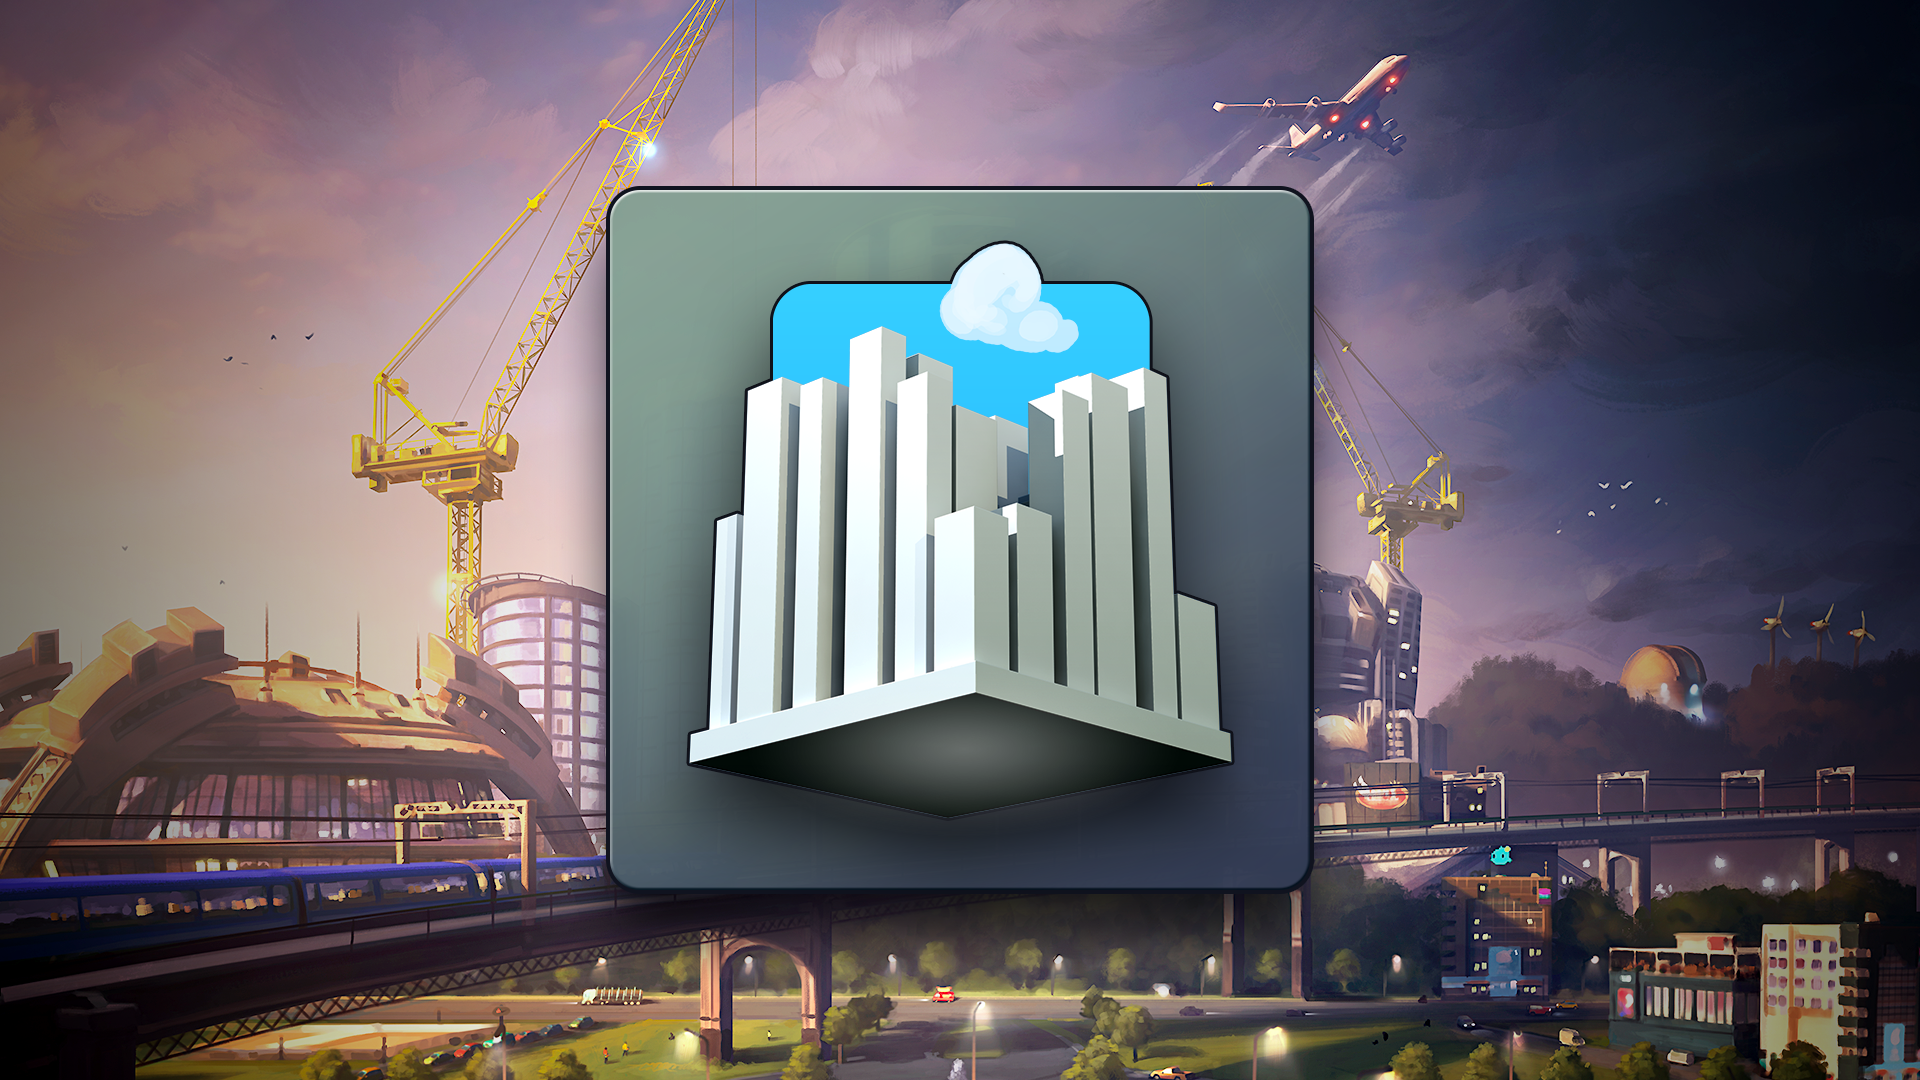 Icon for Heavenly City